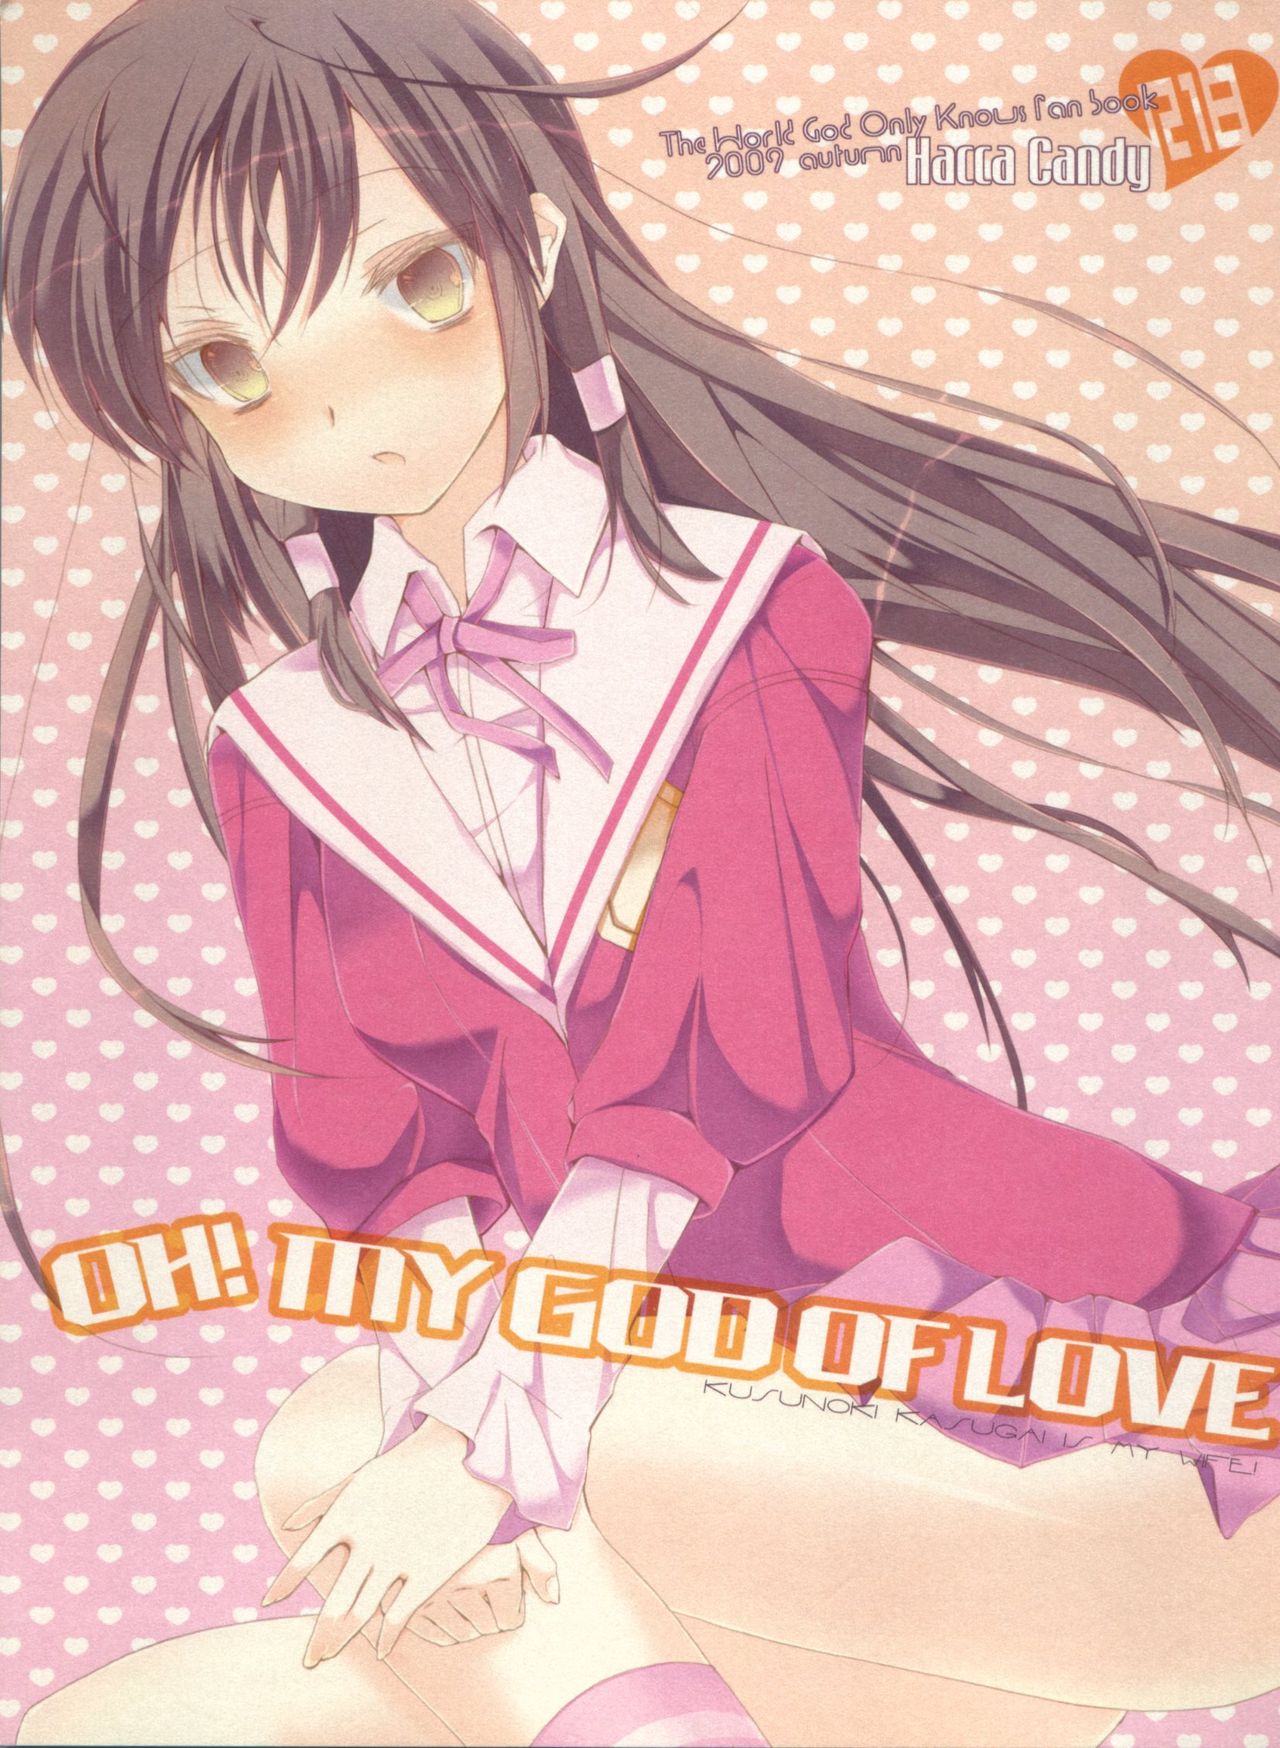 [Hacca Candy (Ise.)] OH!MY GOD OF LOVE (The World God Only Knows) [薄荷キャンディー (いせ。)] OH!MY GOD OF LOVE (神のみぞ知るセカイ)